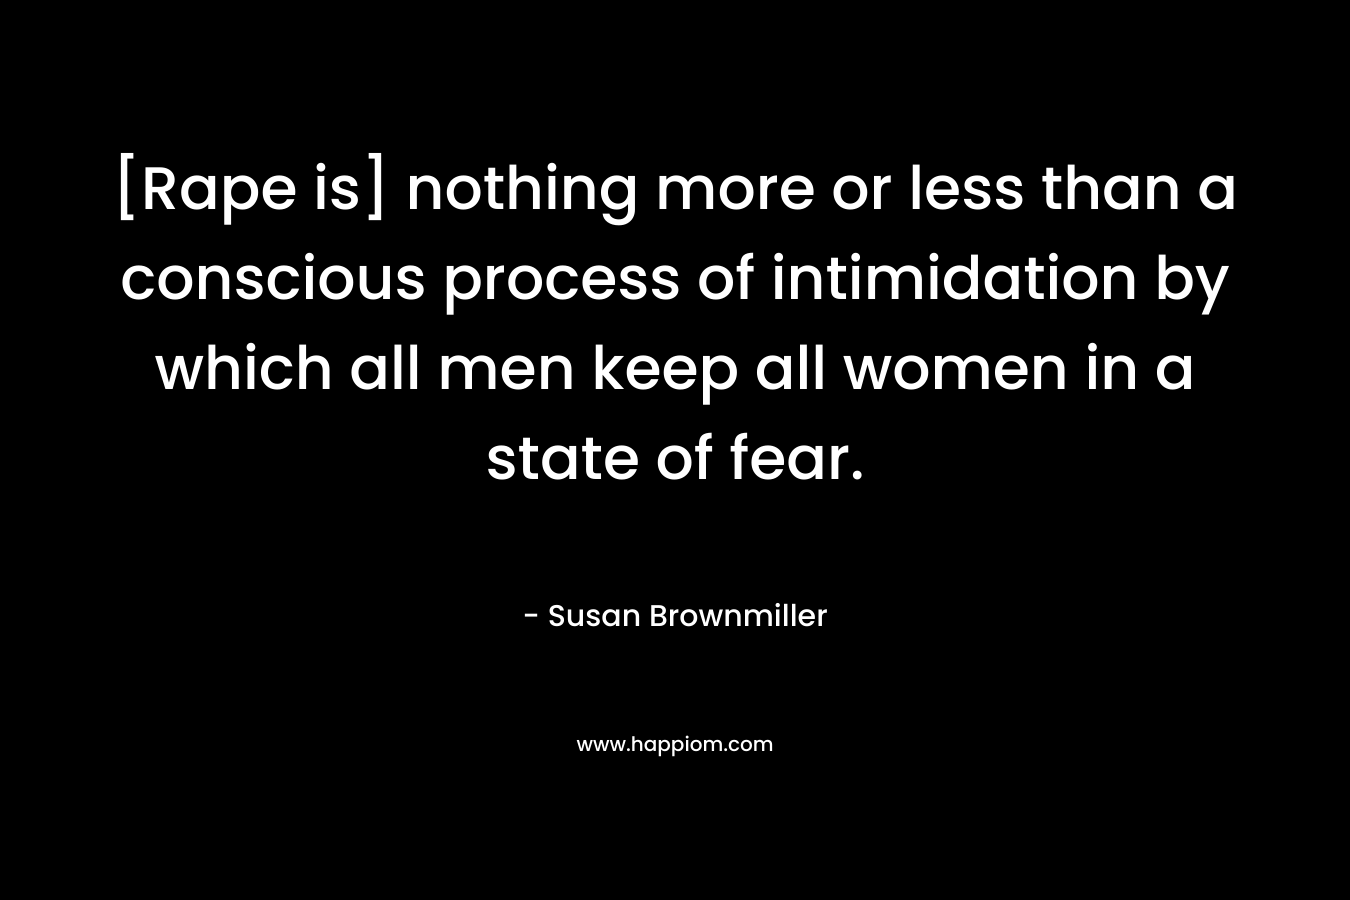 [Rape is] nothing more or less than a conscious process of intimidation by which all men keep all women in a state of fear. – Susan Brownmiller